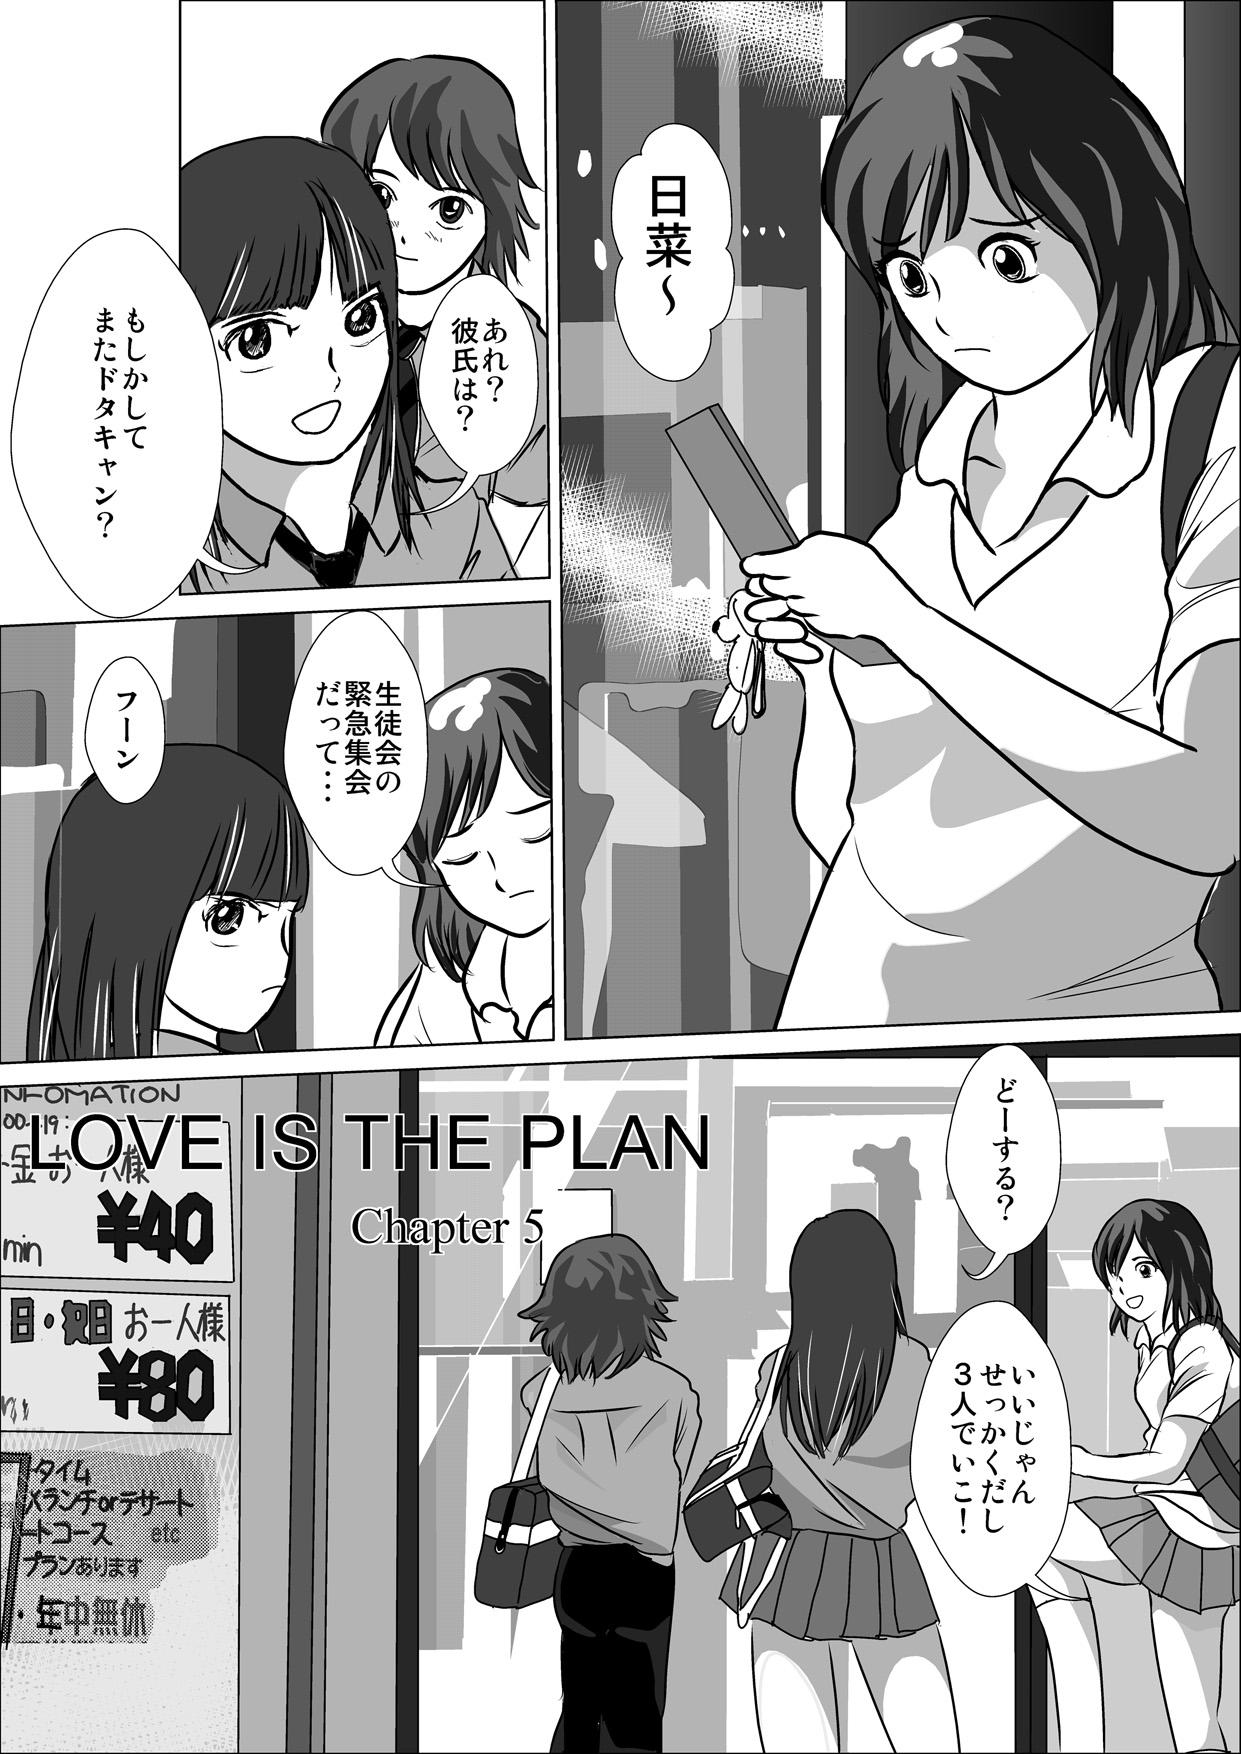 LOVE IS THE PLAN Chapter 5 10